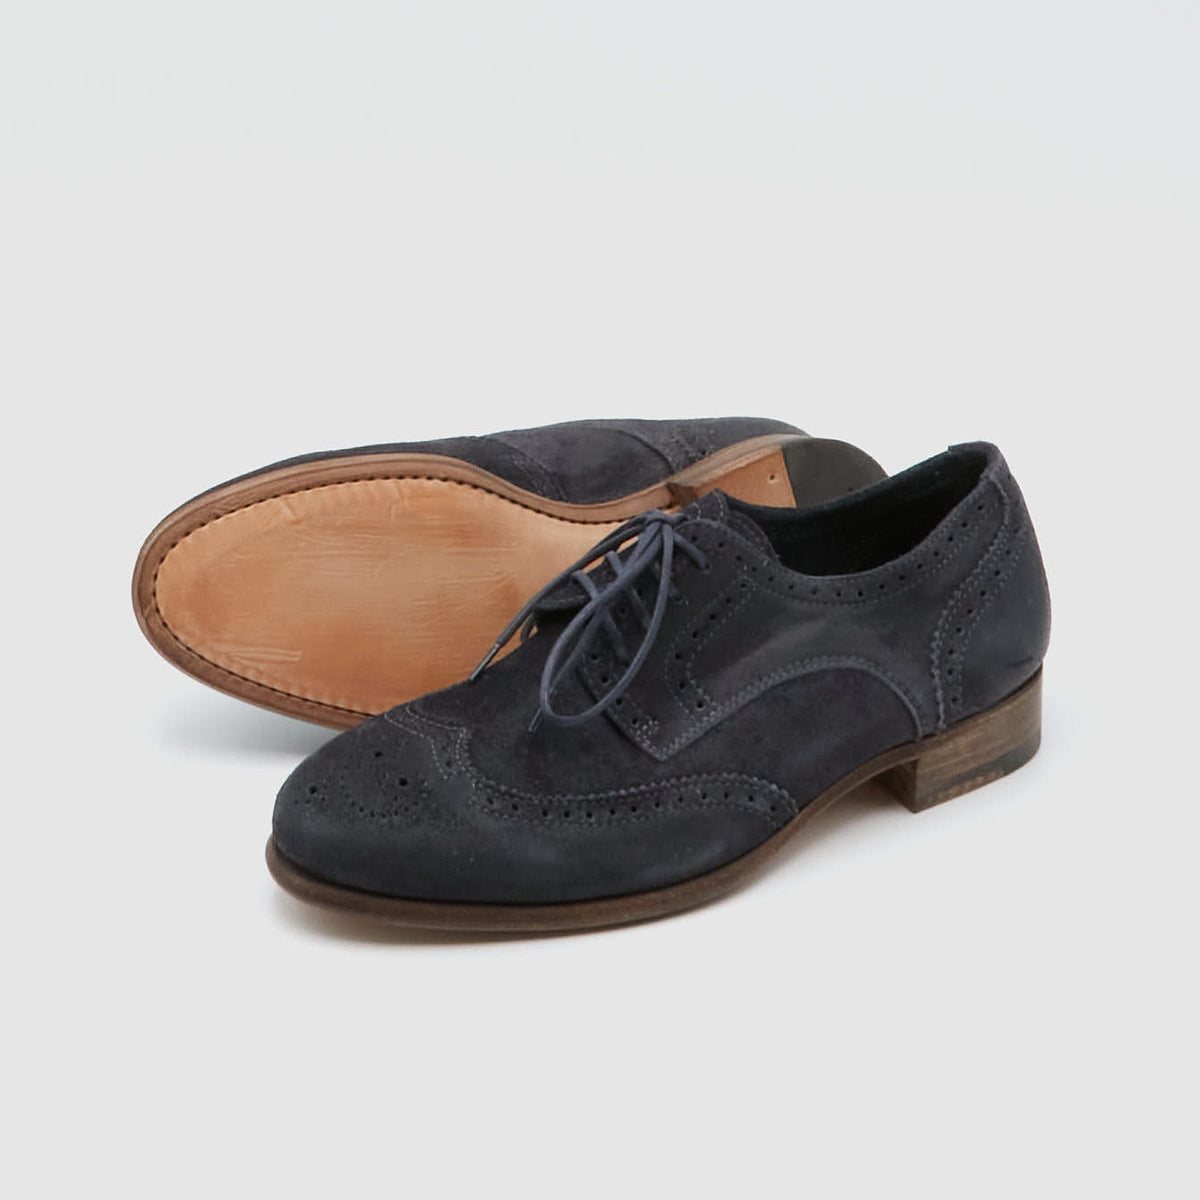 n.d.c. made by hand Ladies Suede  Brogues Shoes